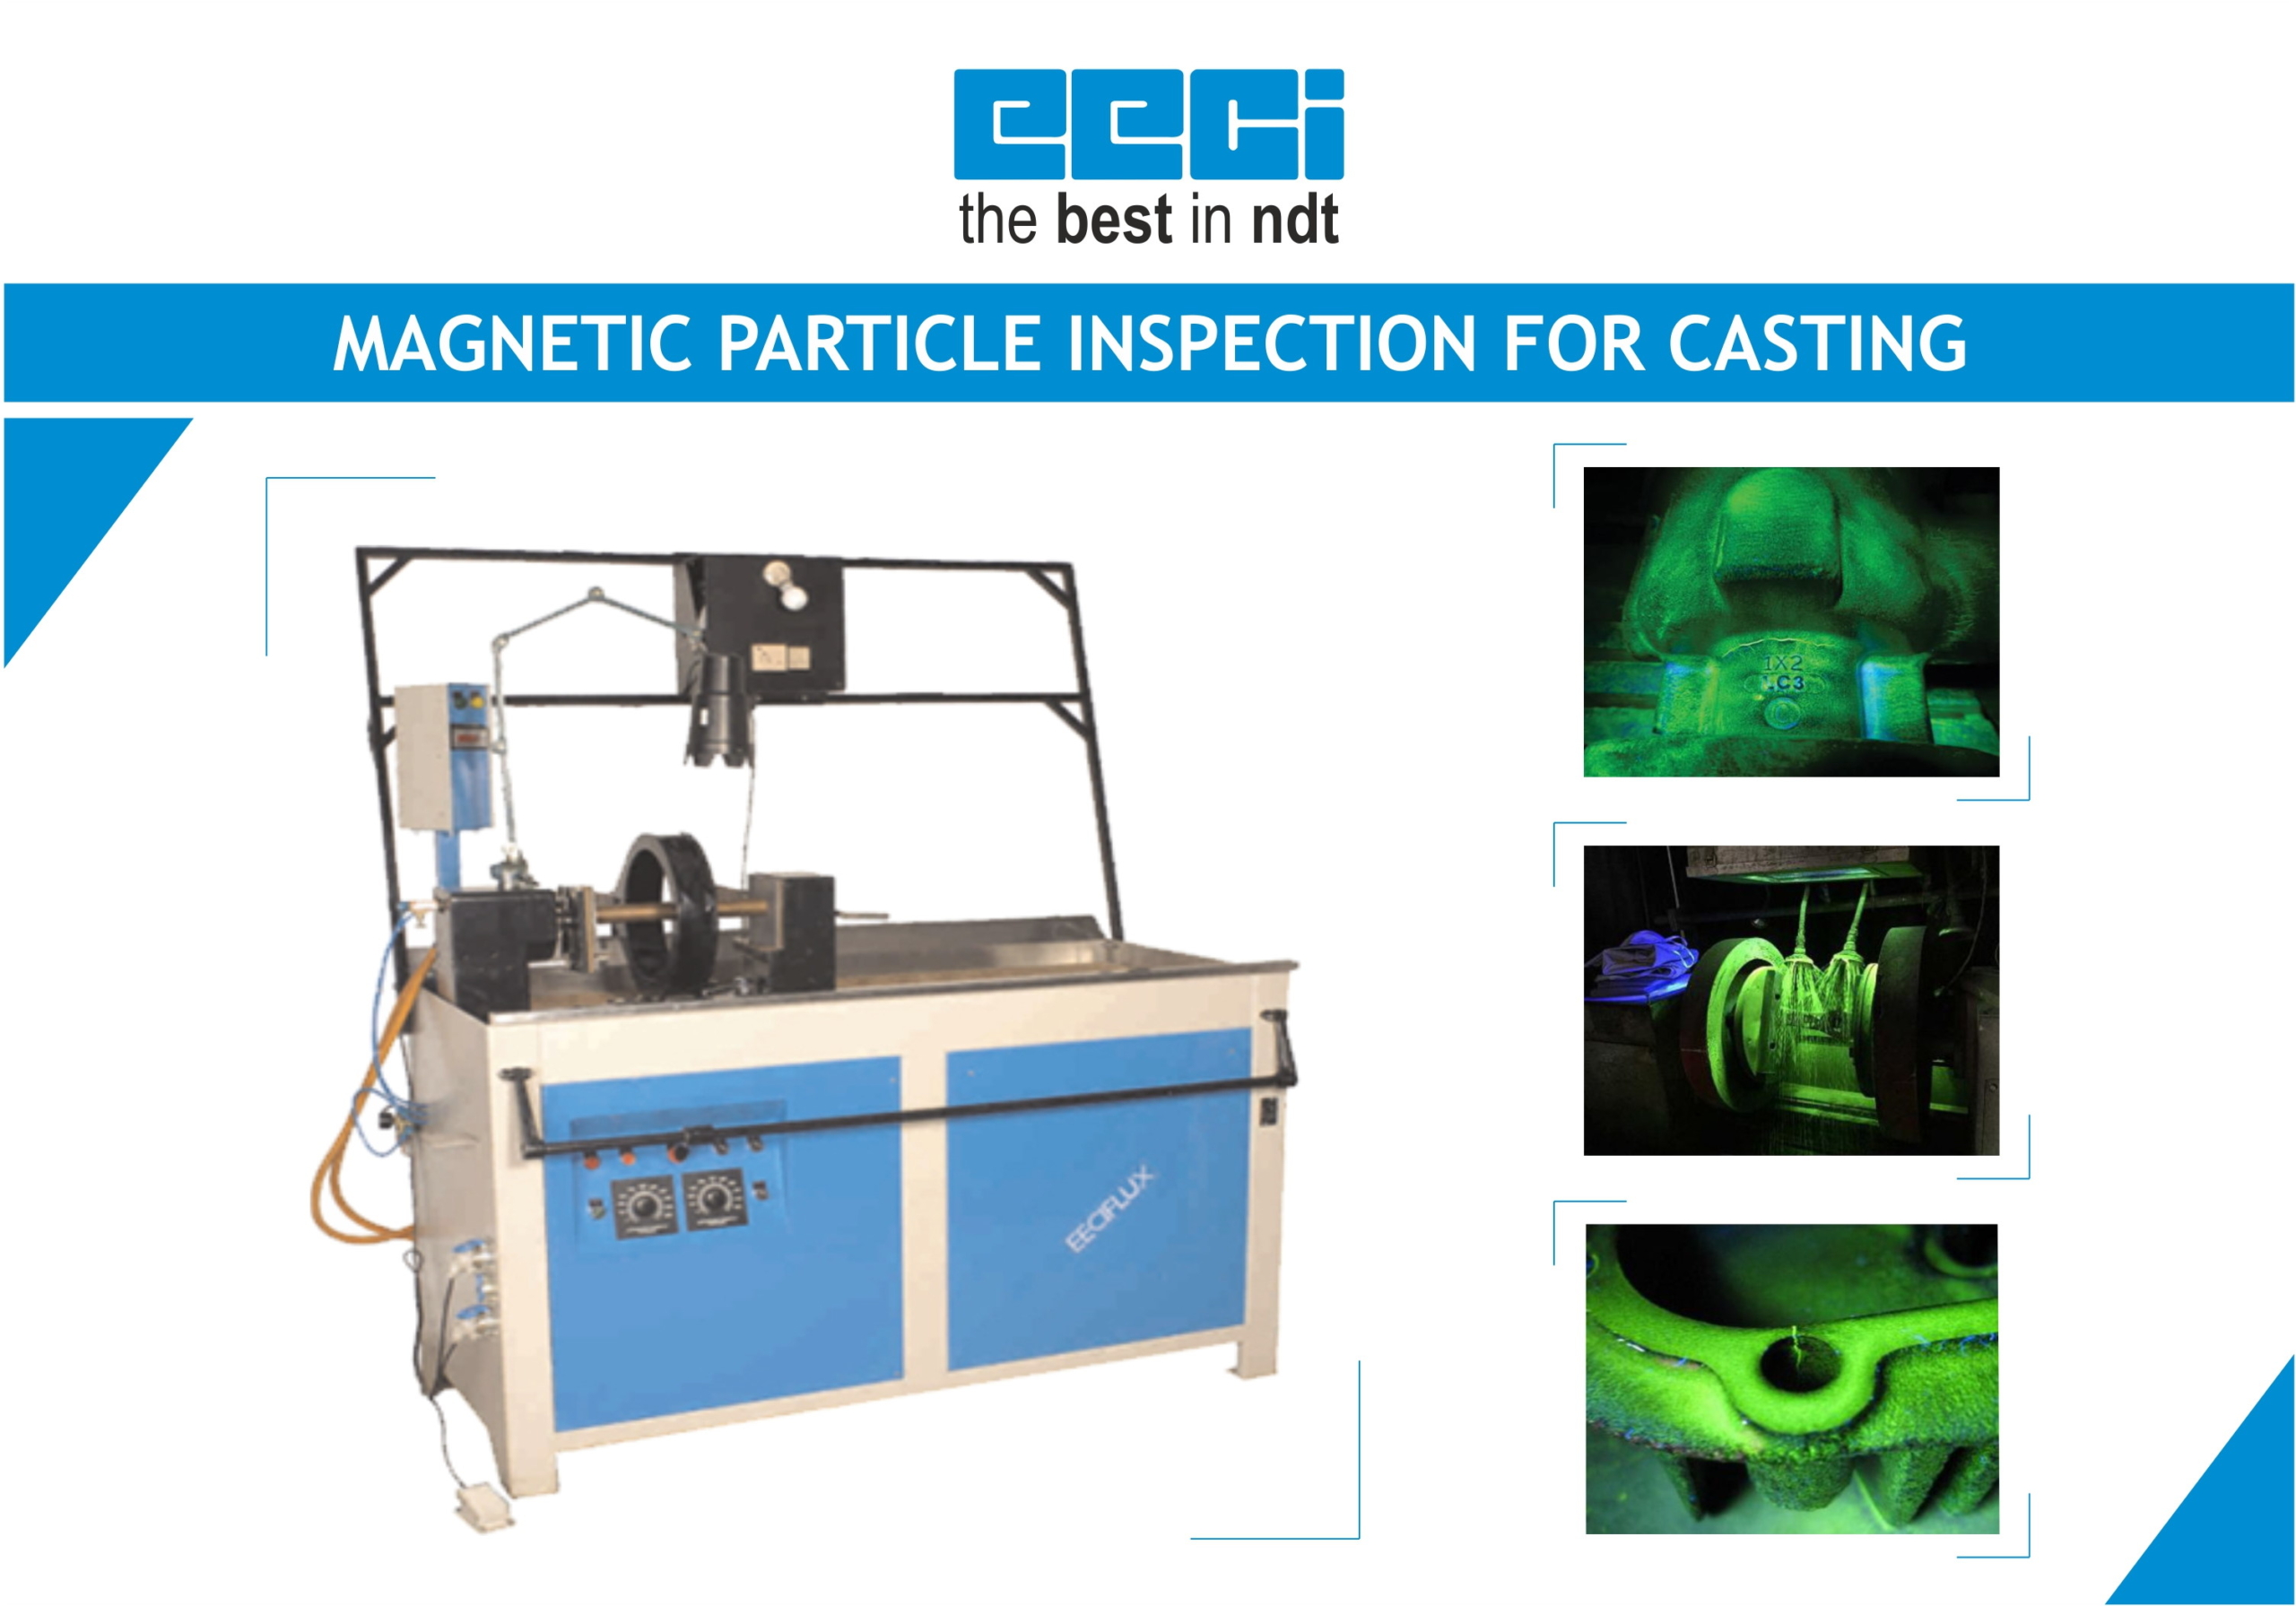 MAGNETIC PARTICLE INSPECTION FOR CASTING